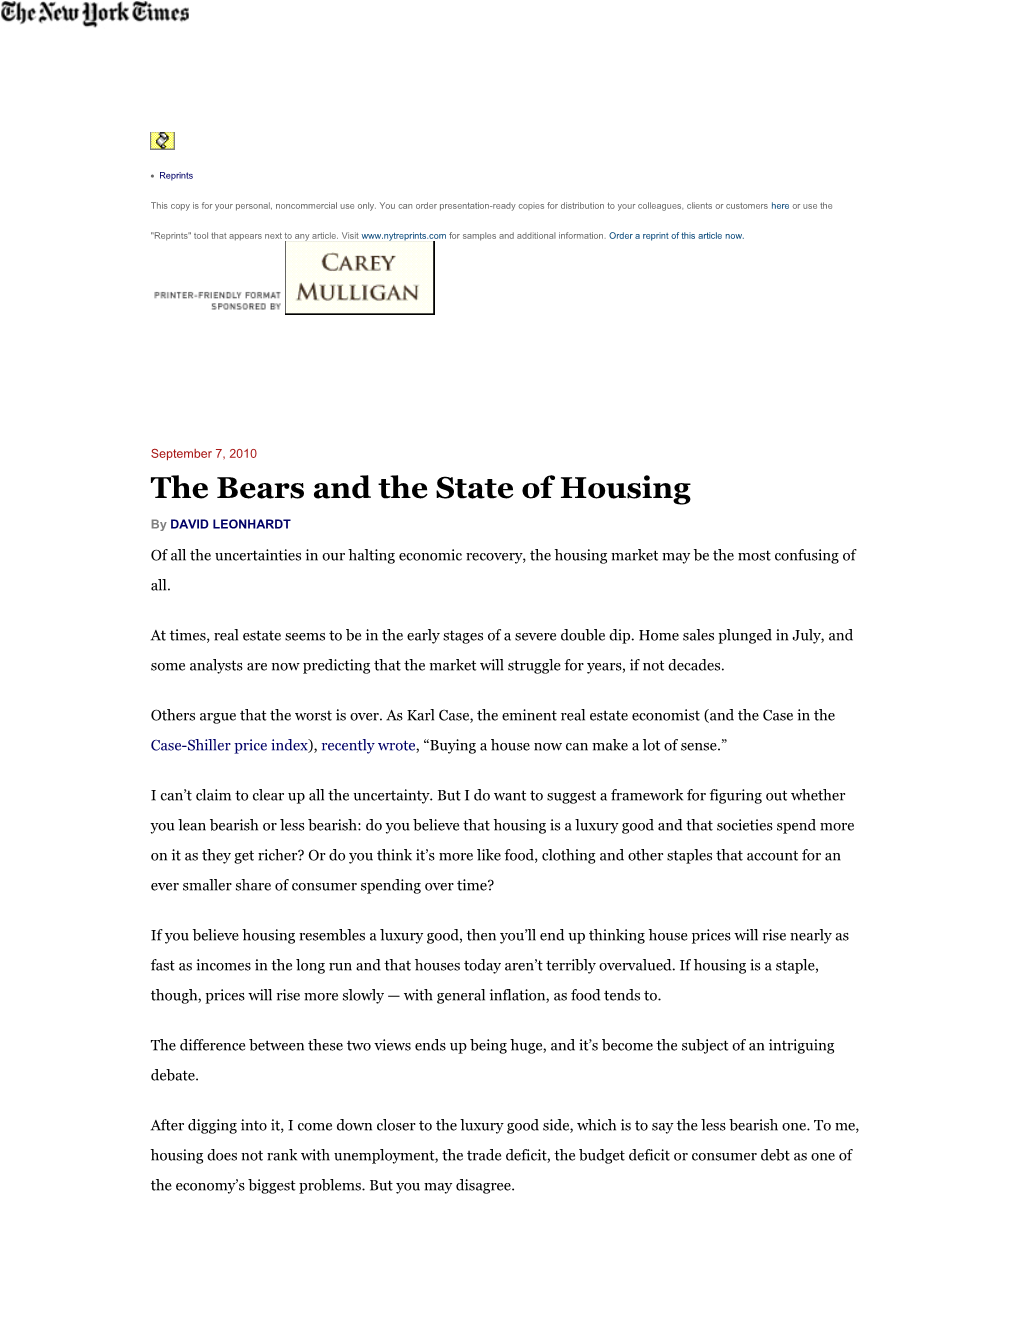 The Bears and the State of Housing